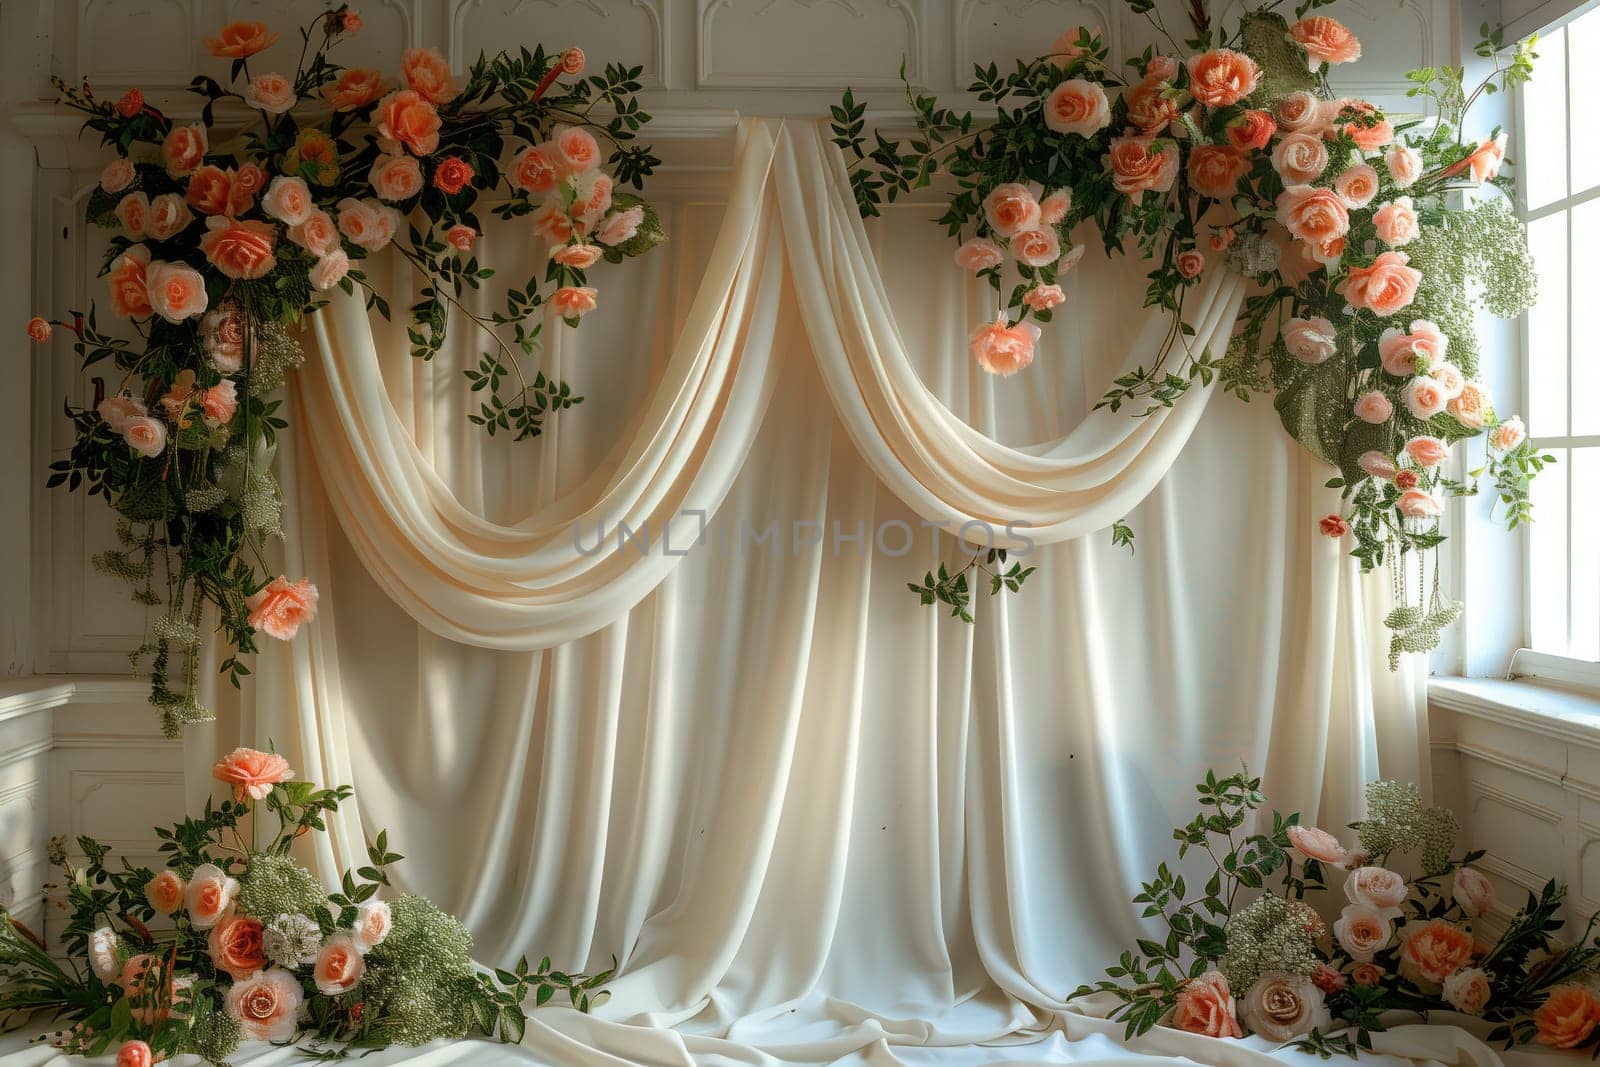 A beautiful room adorned with white curtains and flower decorations, creating a serene and elegant interior design for any occasion